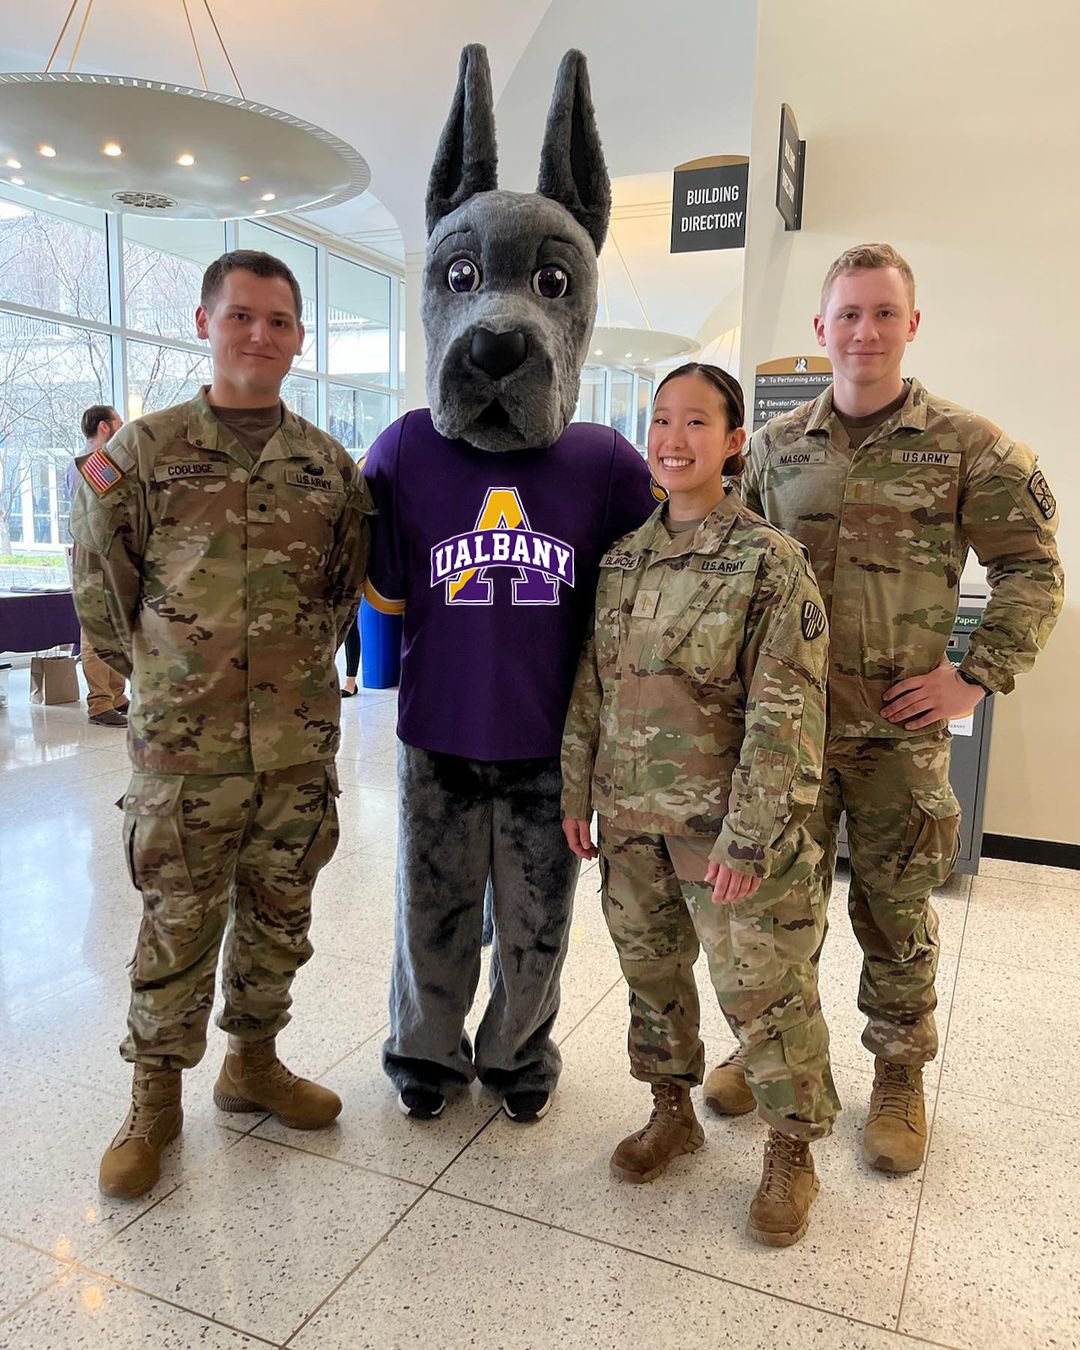 Army ROTC members with Damien the Great Dane mascot on UAlbany Accepted Students Day.